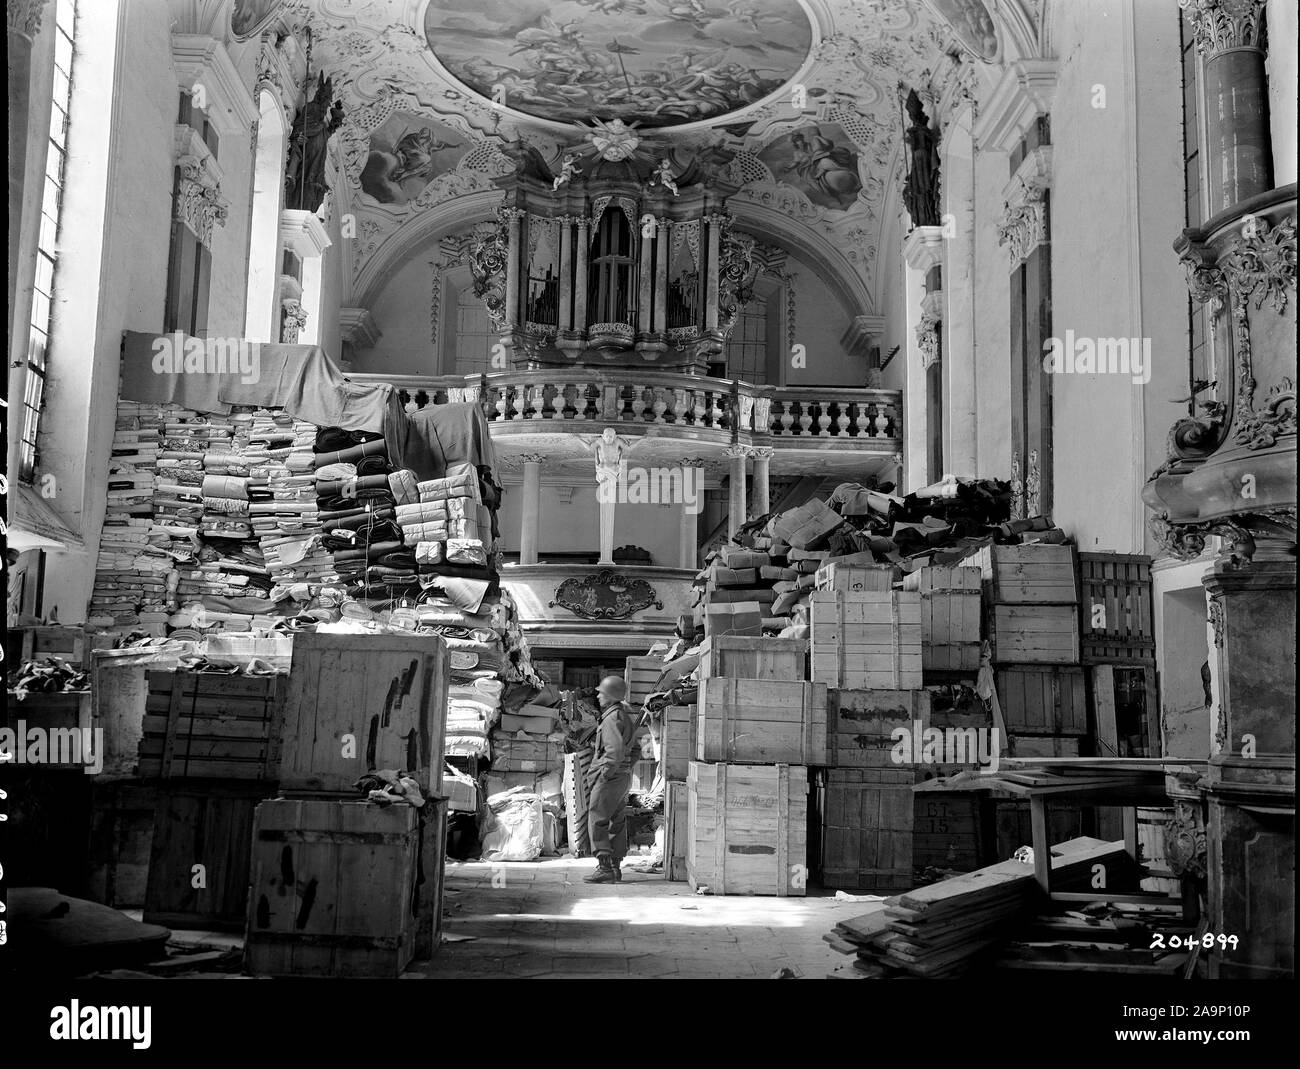 Original caption: April 24, 1945 -  German loot stored in church at Ellingen, Germany found by troops of the U.S. Third Army. Stock Photo